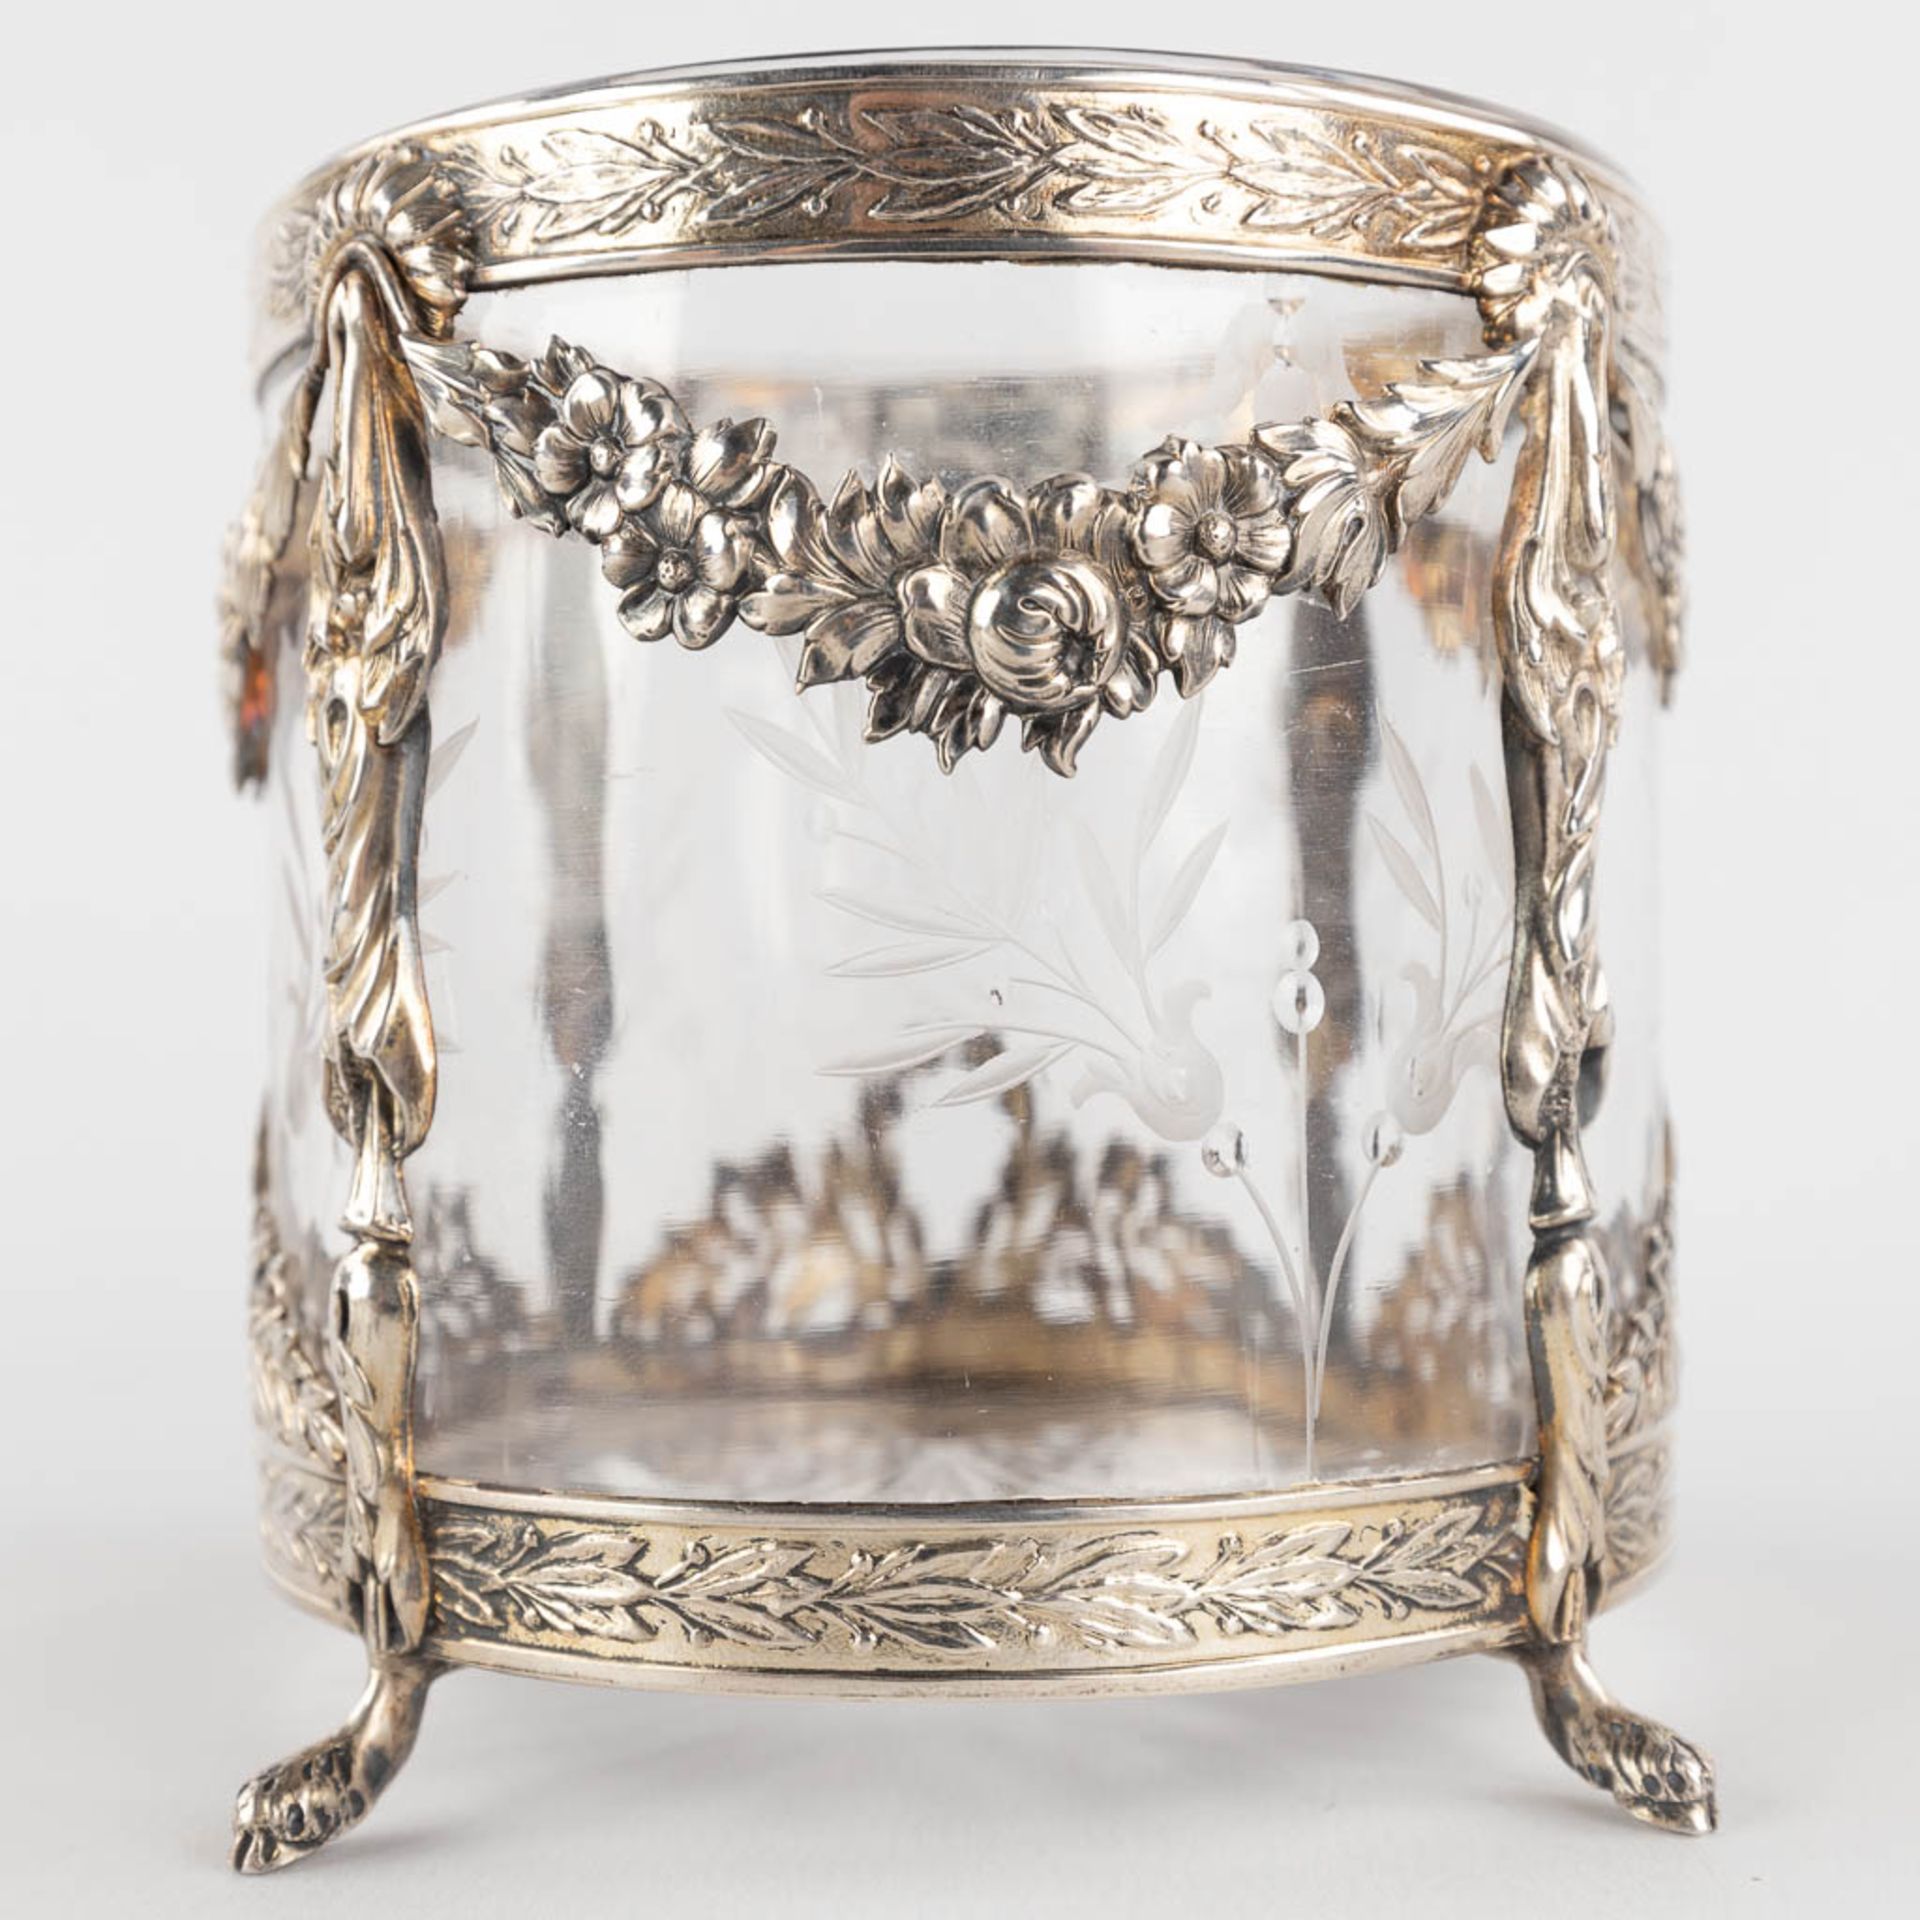 A small storage jar, glass mounted with silver, decorated with garlands. France. (H:13 x D:11,5 cm) - Image 13 of 15